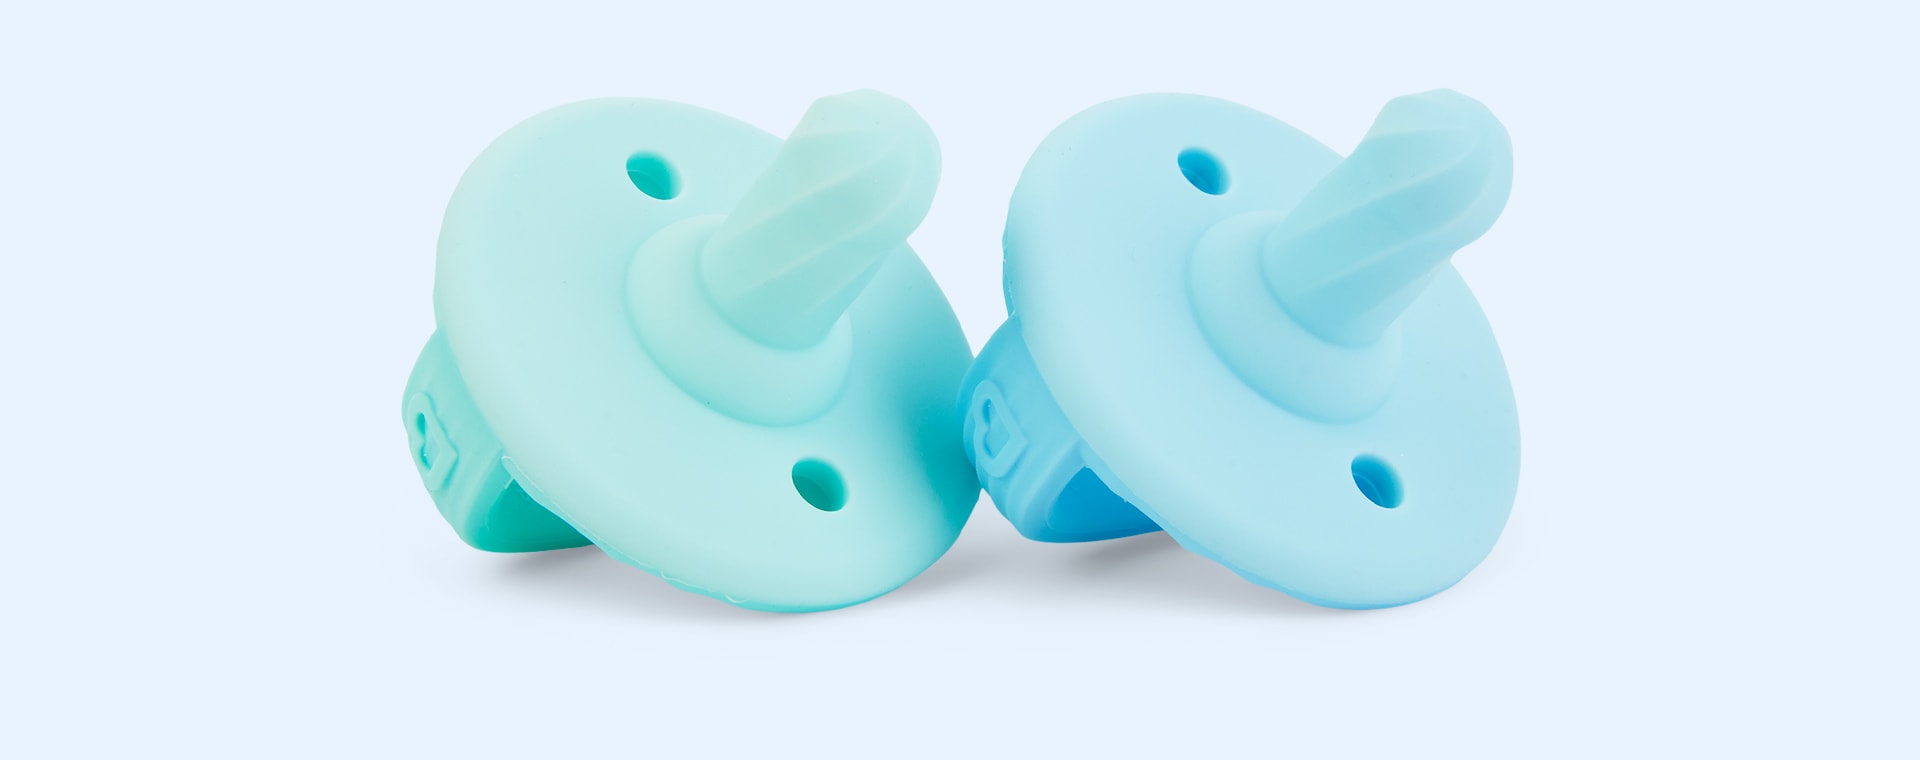 Blue/Green Munchkin 2-Pack Sili-Soothe & Teethe Pacifiers & Teethers